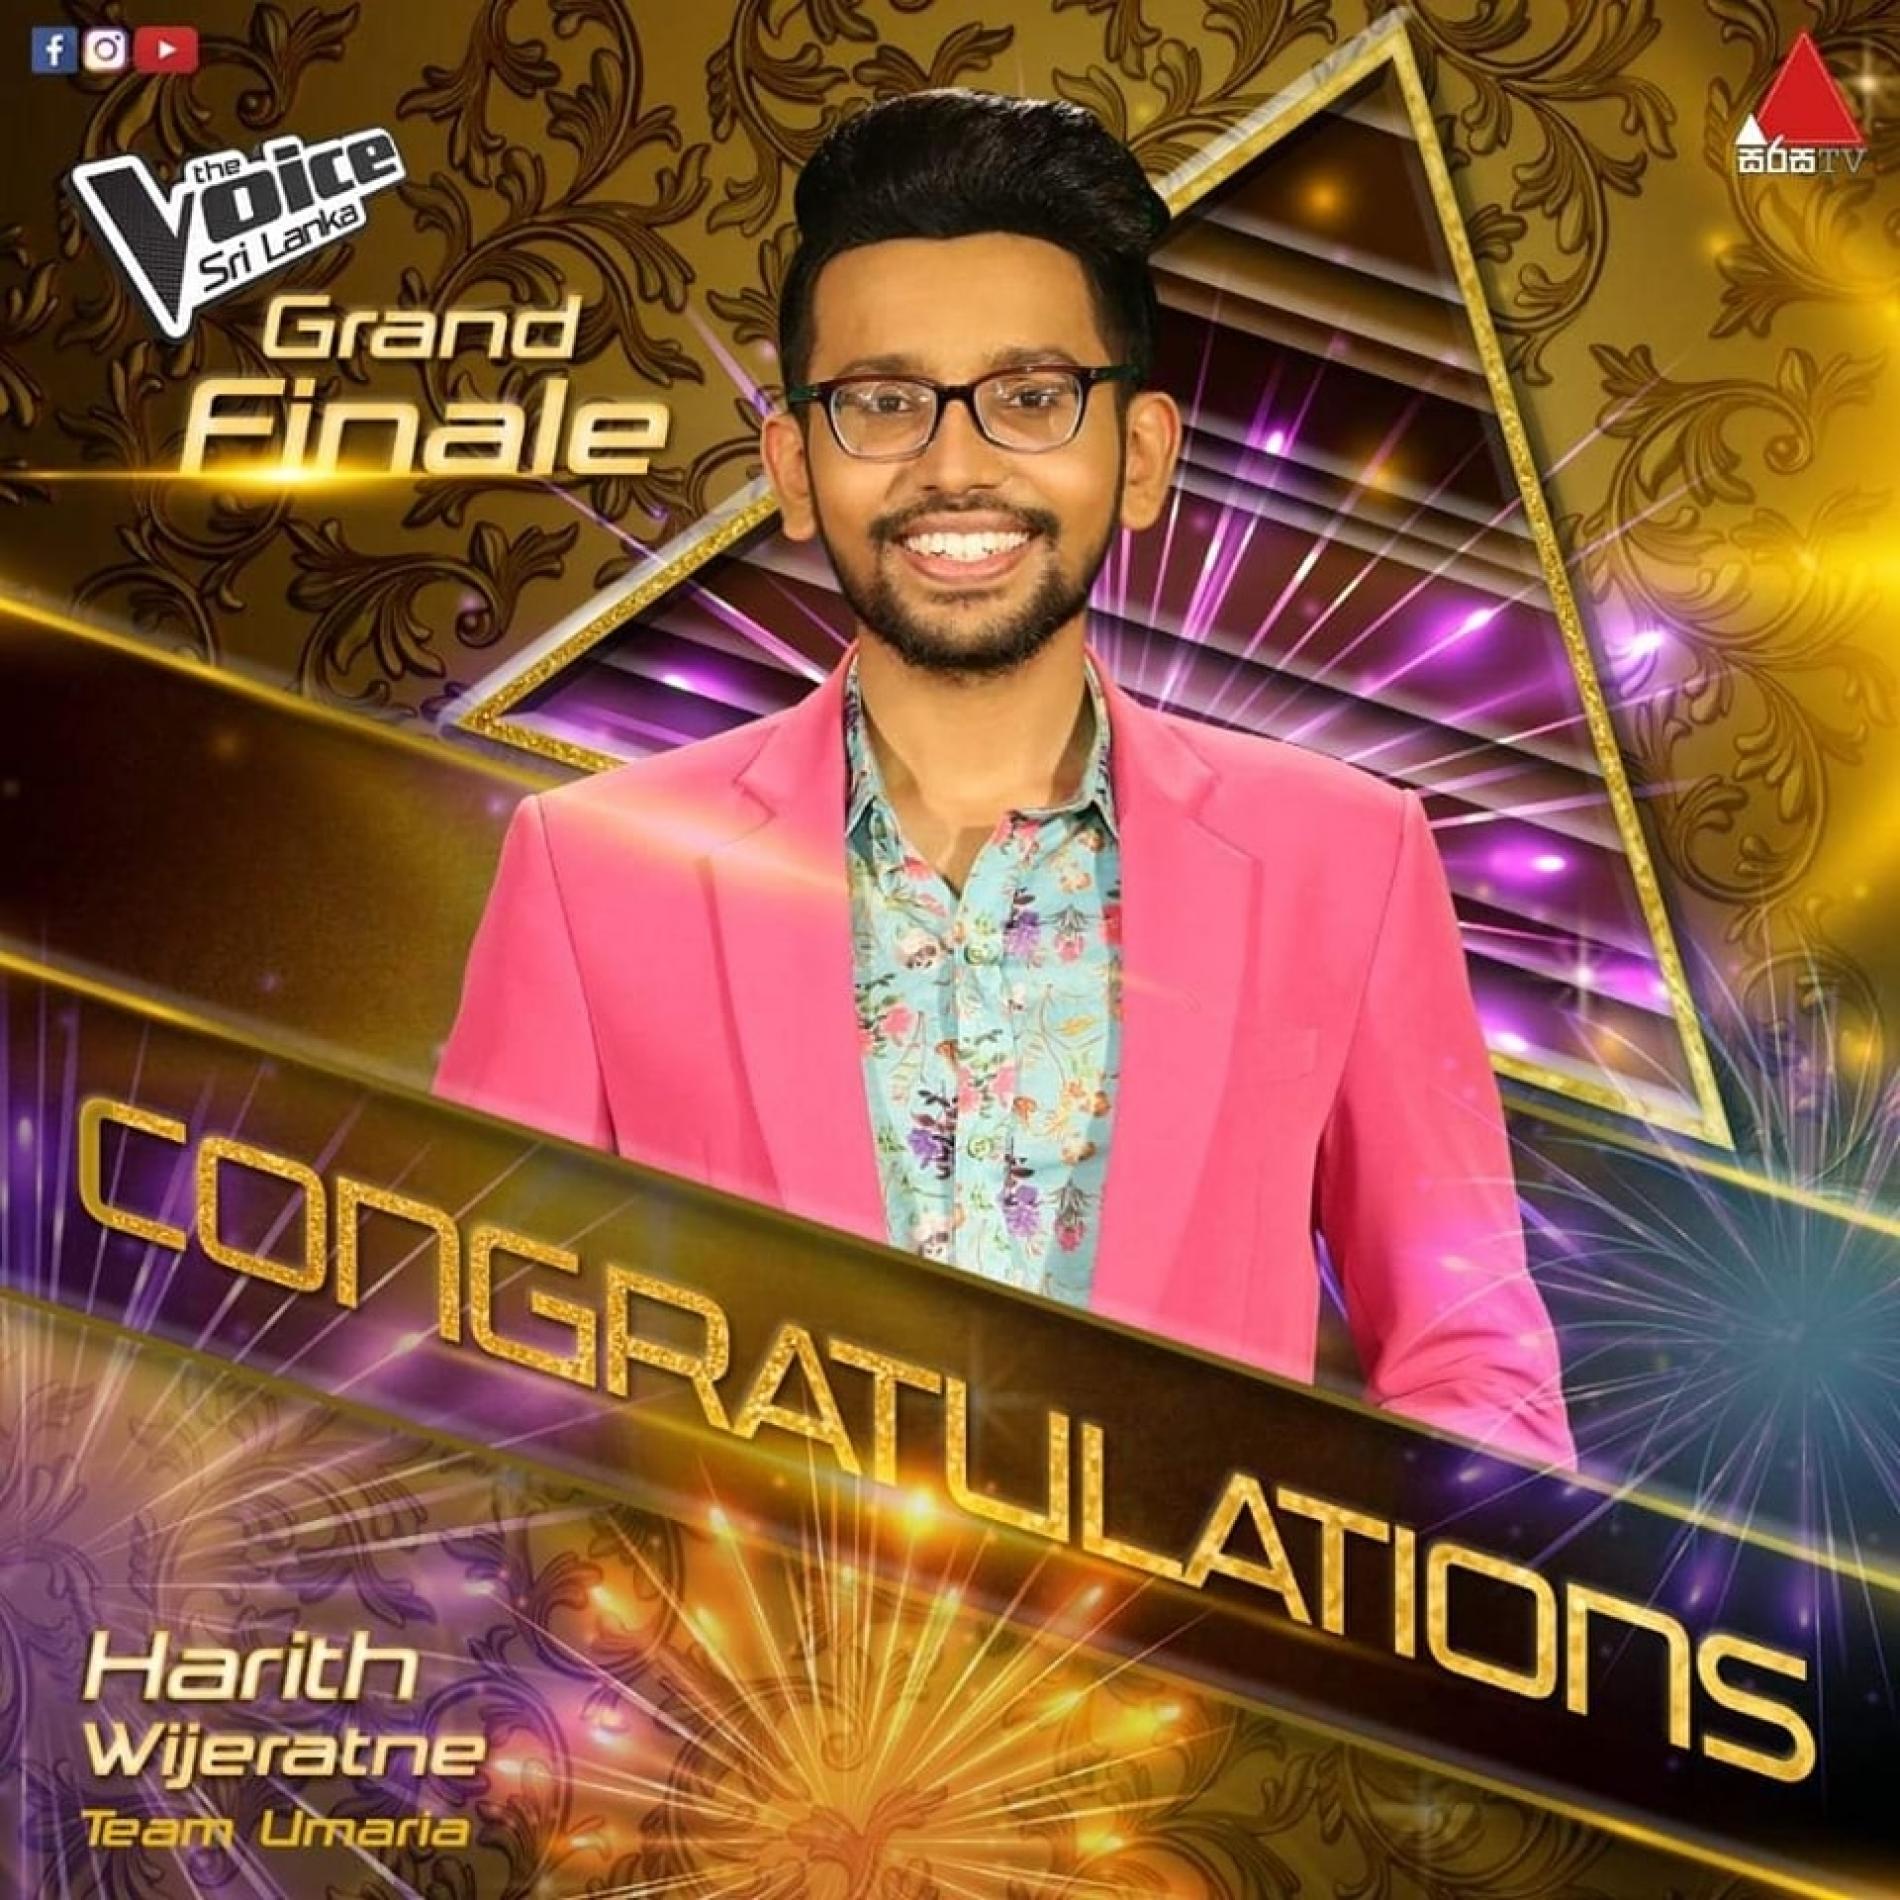 News : Harith Is The First Winner Of The Voice Sri Lanka!